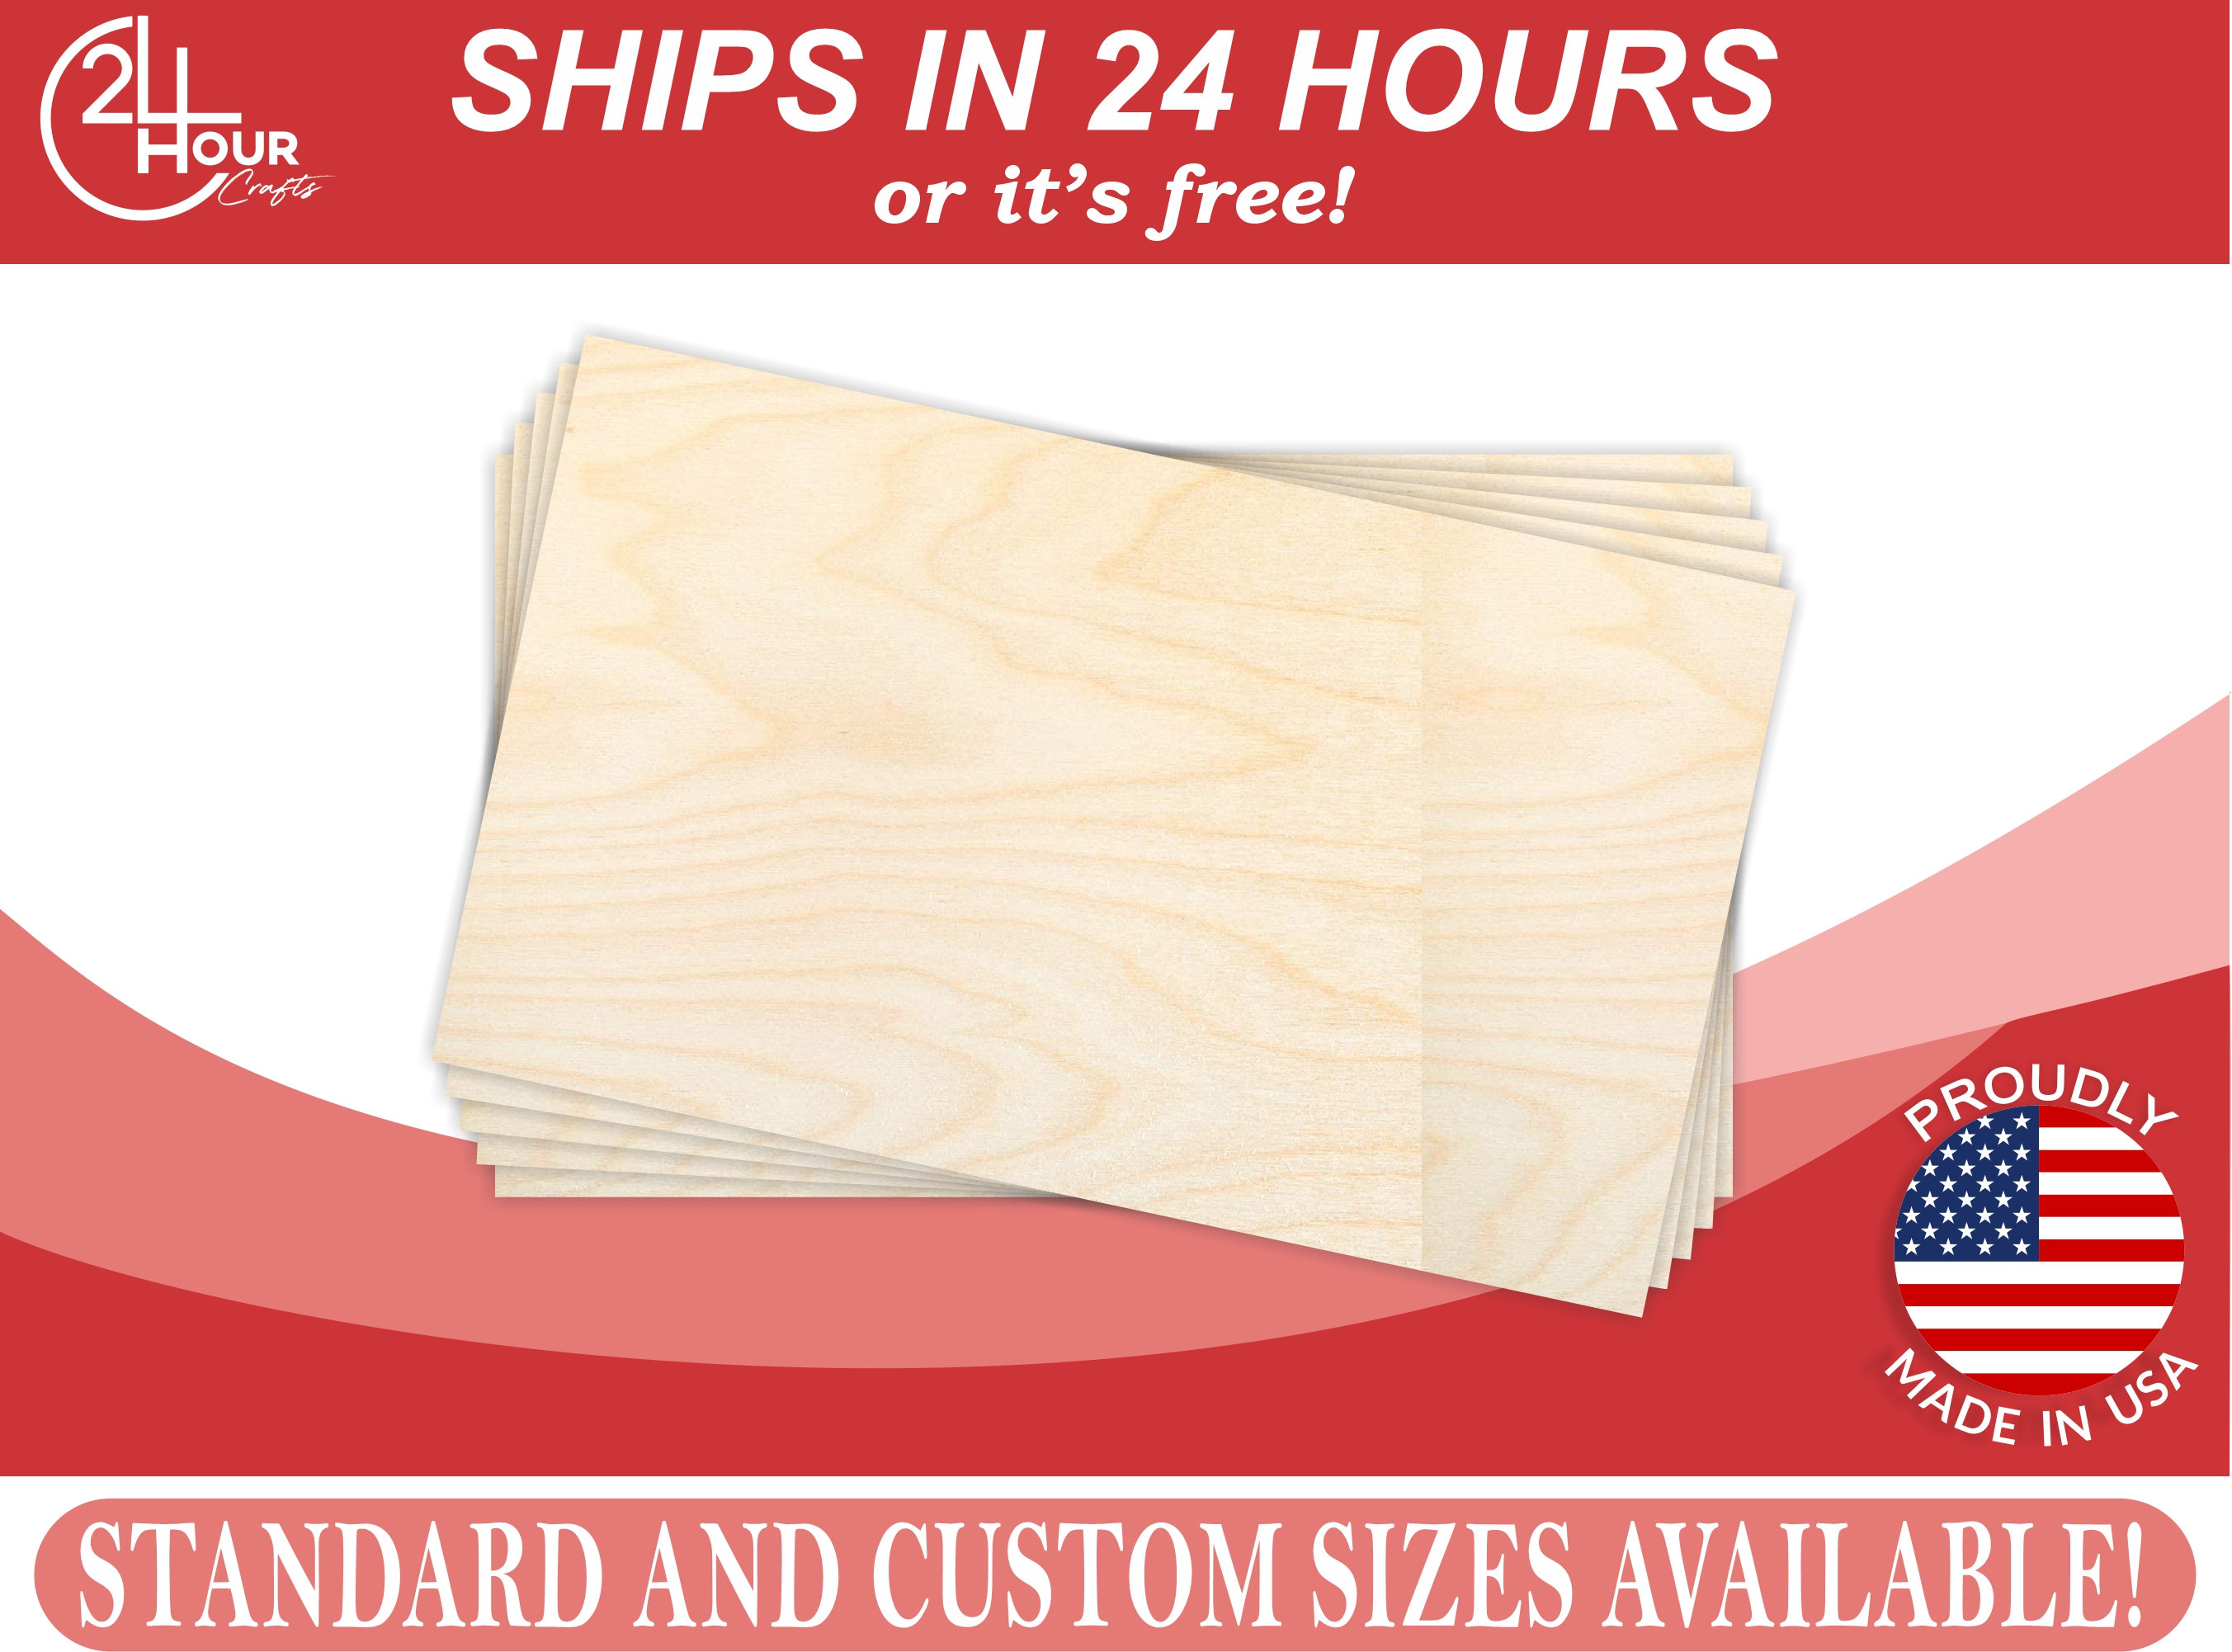 Rapid Slicer - Red - Wholesale - Carton of 24 - Master Pack